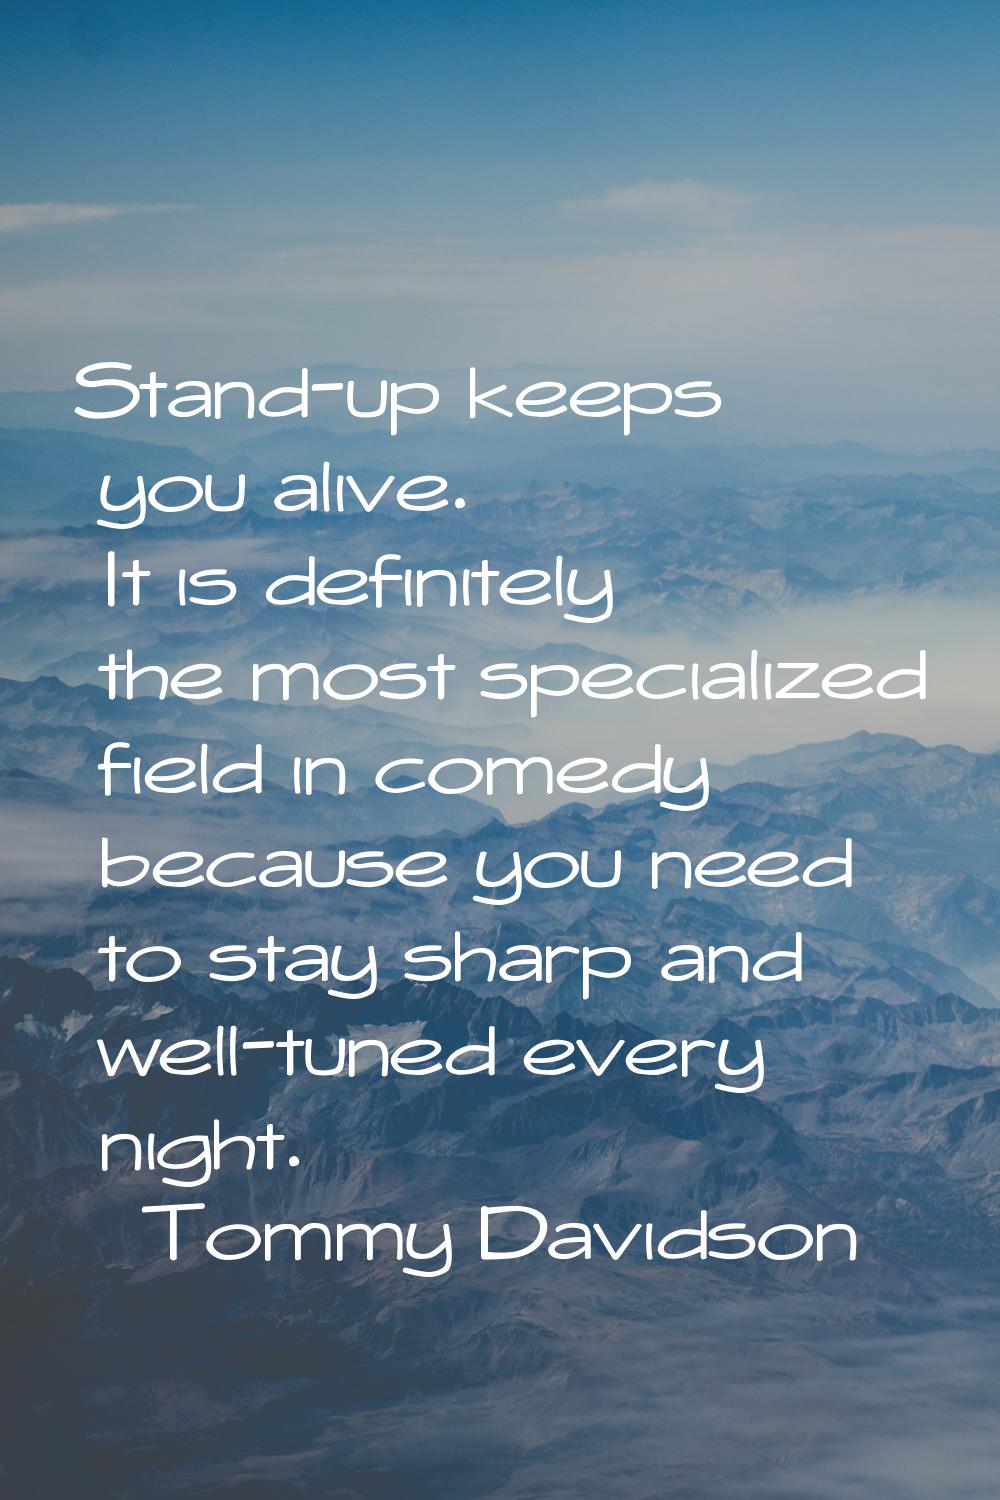 Stand-up keeps you alive. It is definitely the most specialized field in comedy because you need to